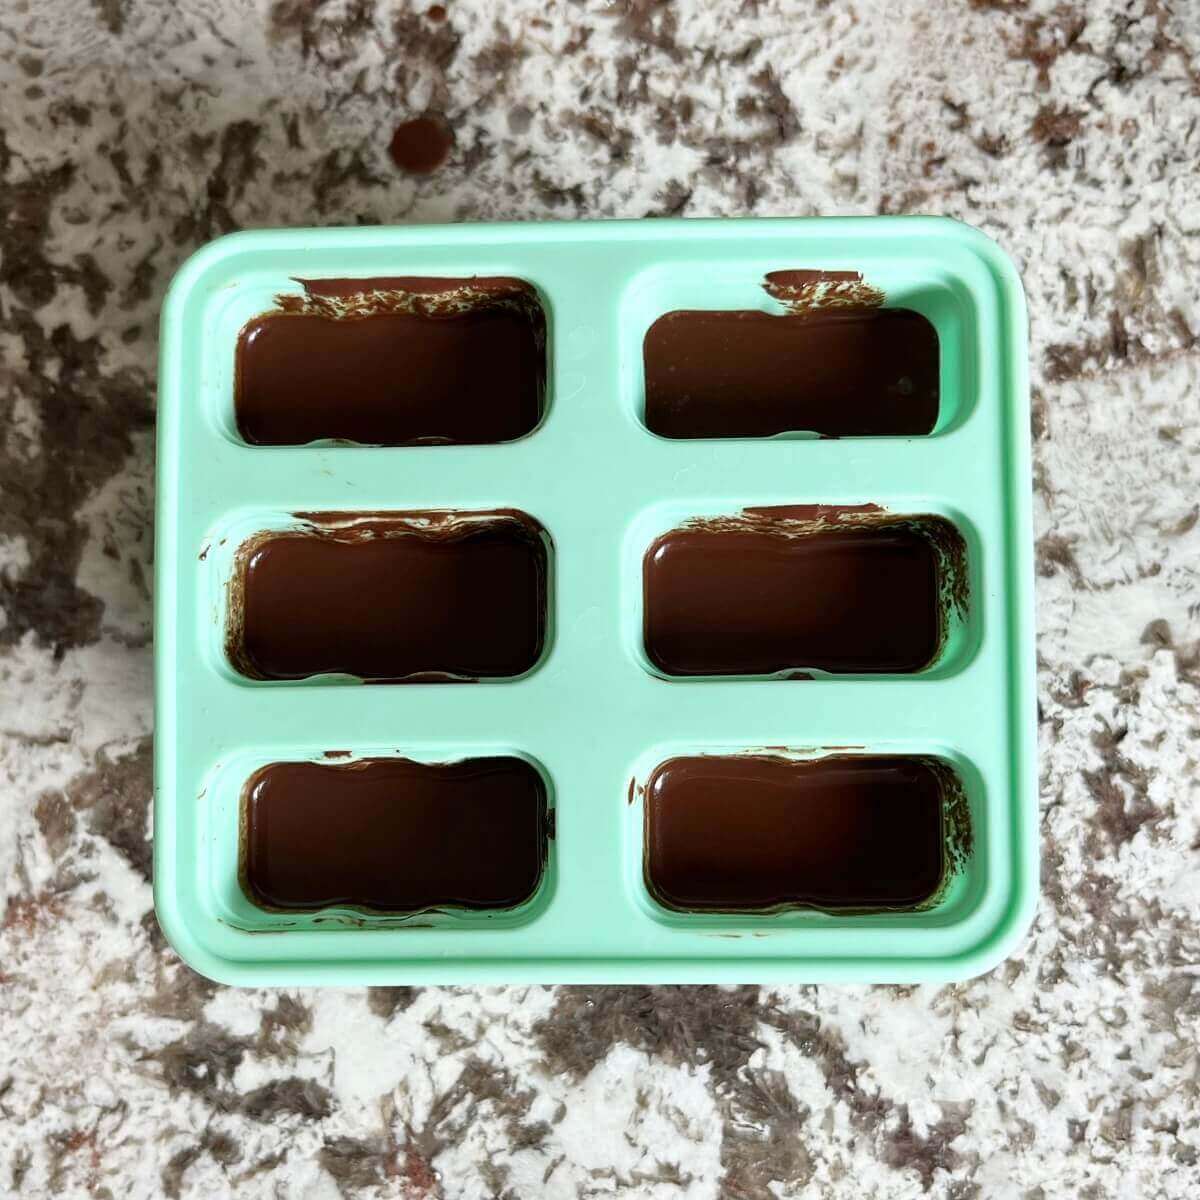 A popsicles mold with chocolate batter in each slot.